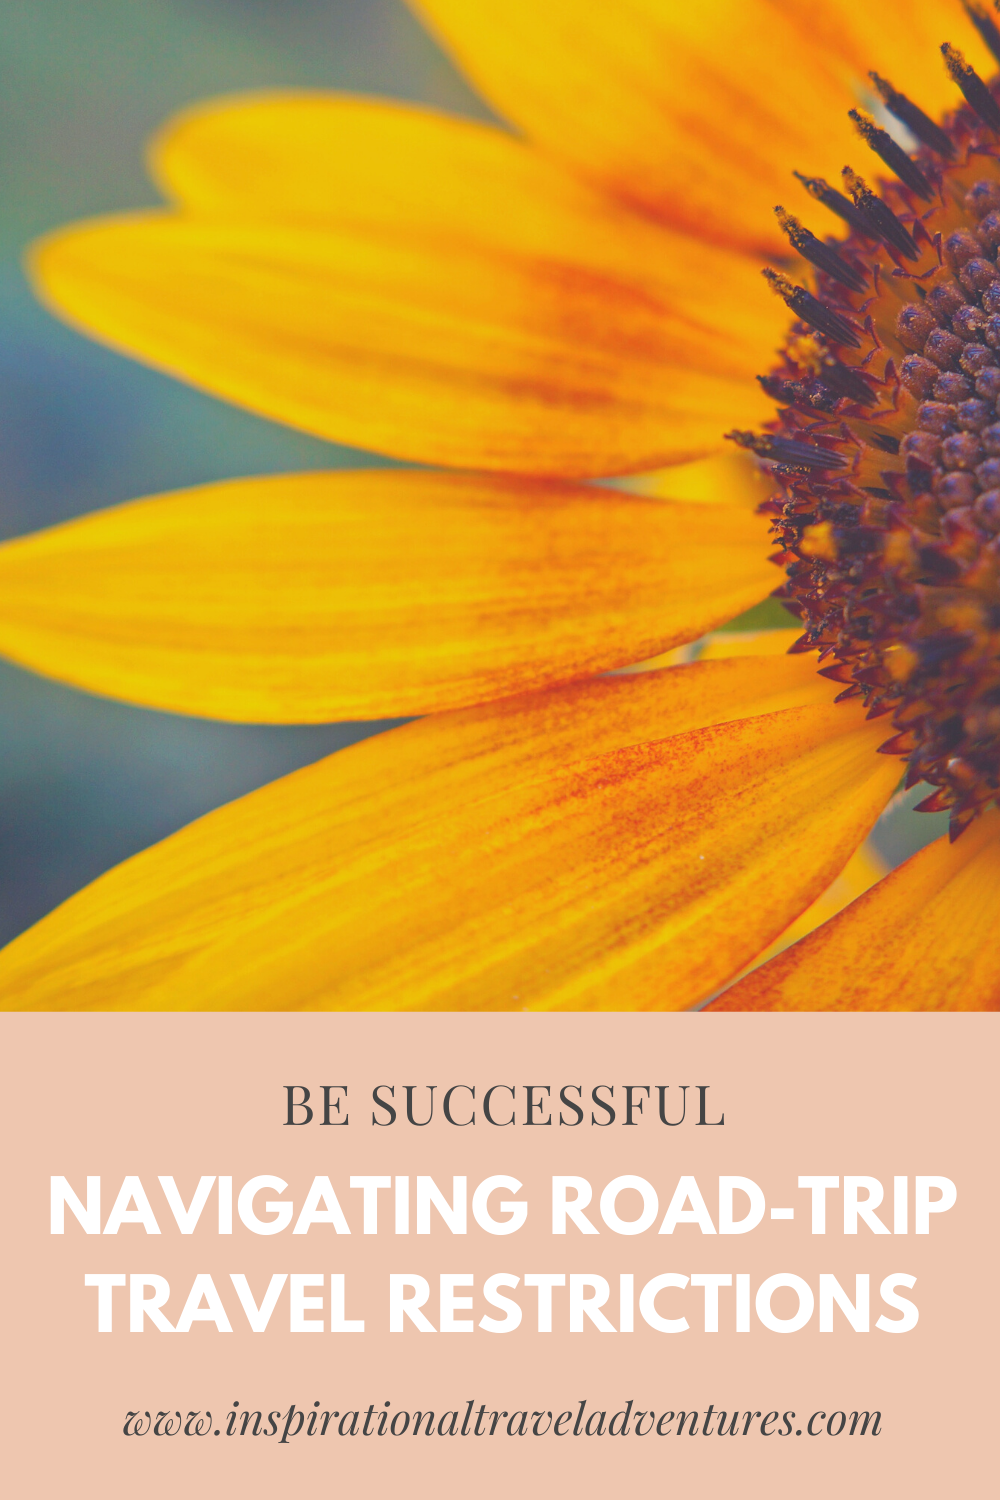 BE SUCCESSFUL NAVIGATING ROAD-TRIP TRAVEL RESTRICTIONS